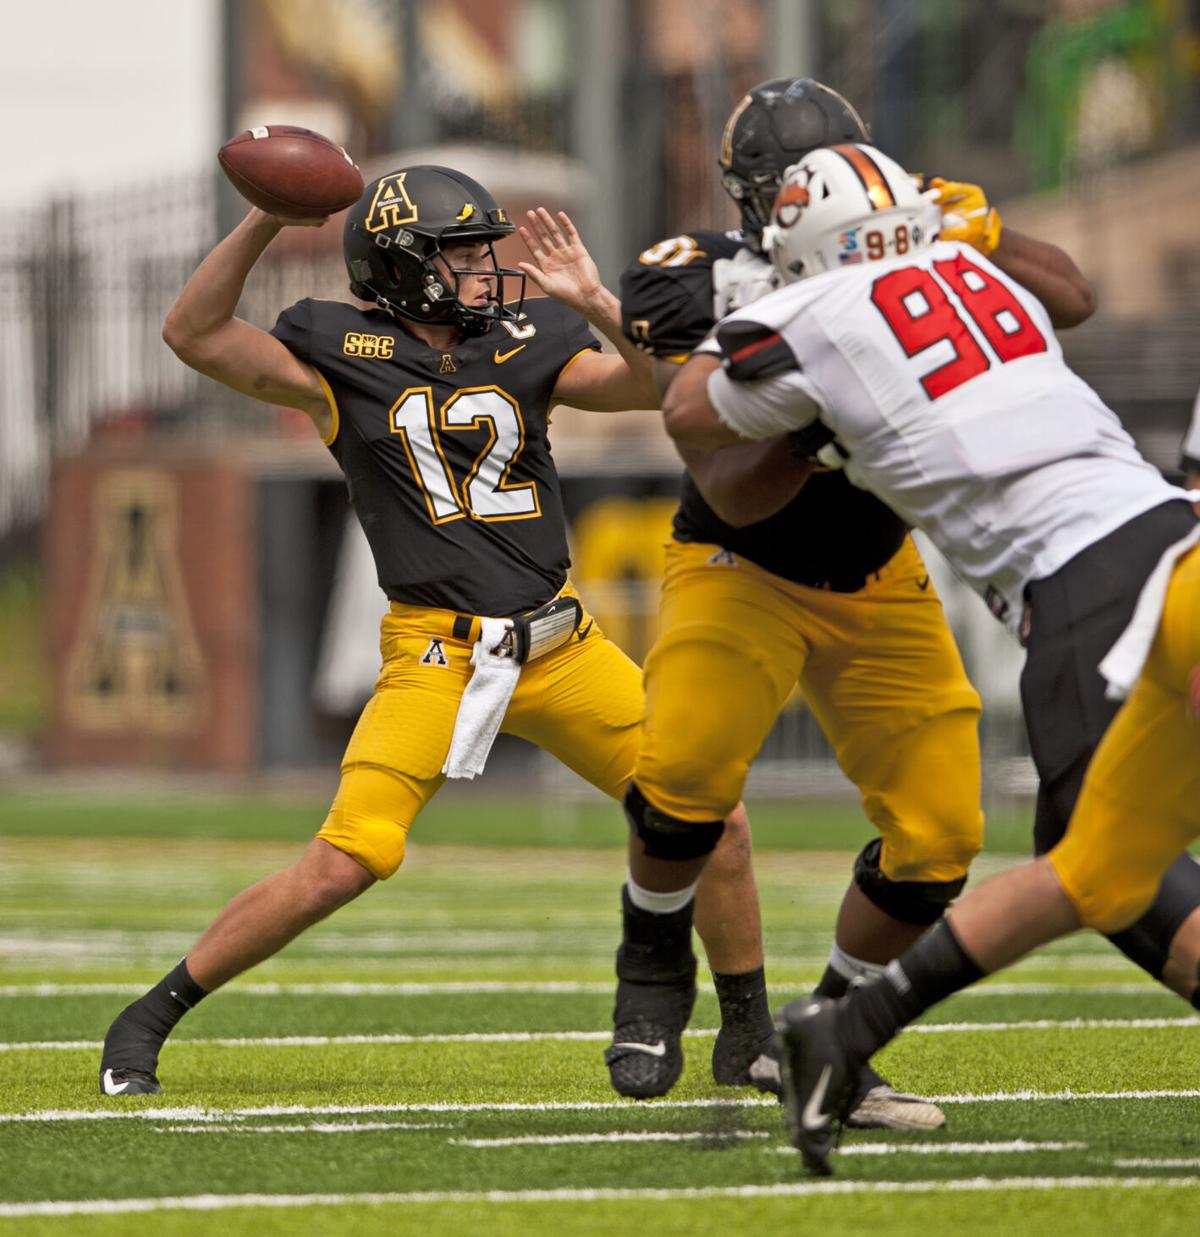 Appalachian State football notebook: Shawn Clark, Zac Thomas and Shaun Jolly share excitement as